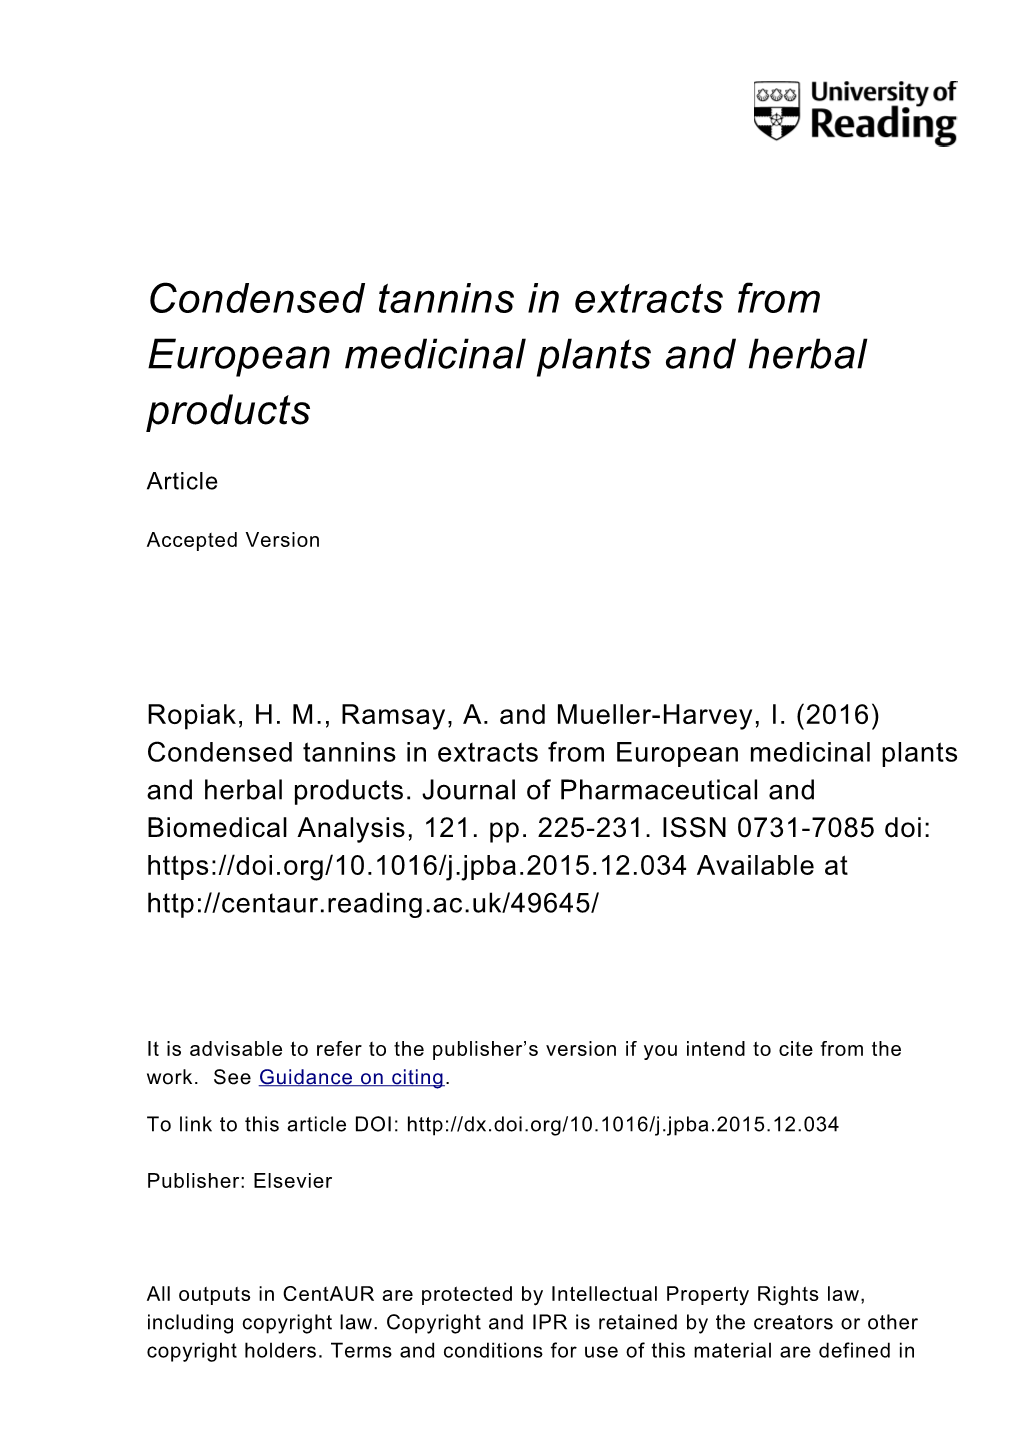 Condensed Tannins in Extracts from European Medicinal Plants and Herbal Products